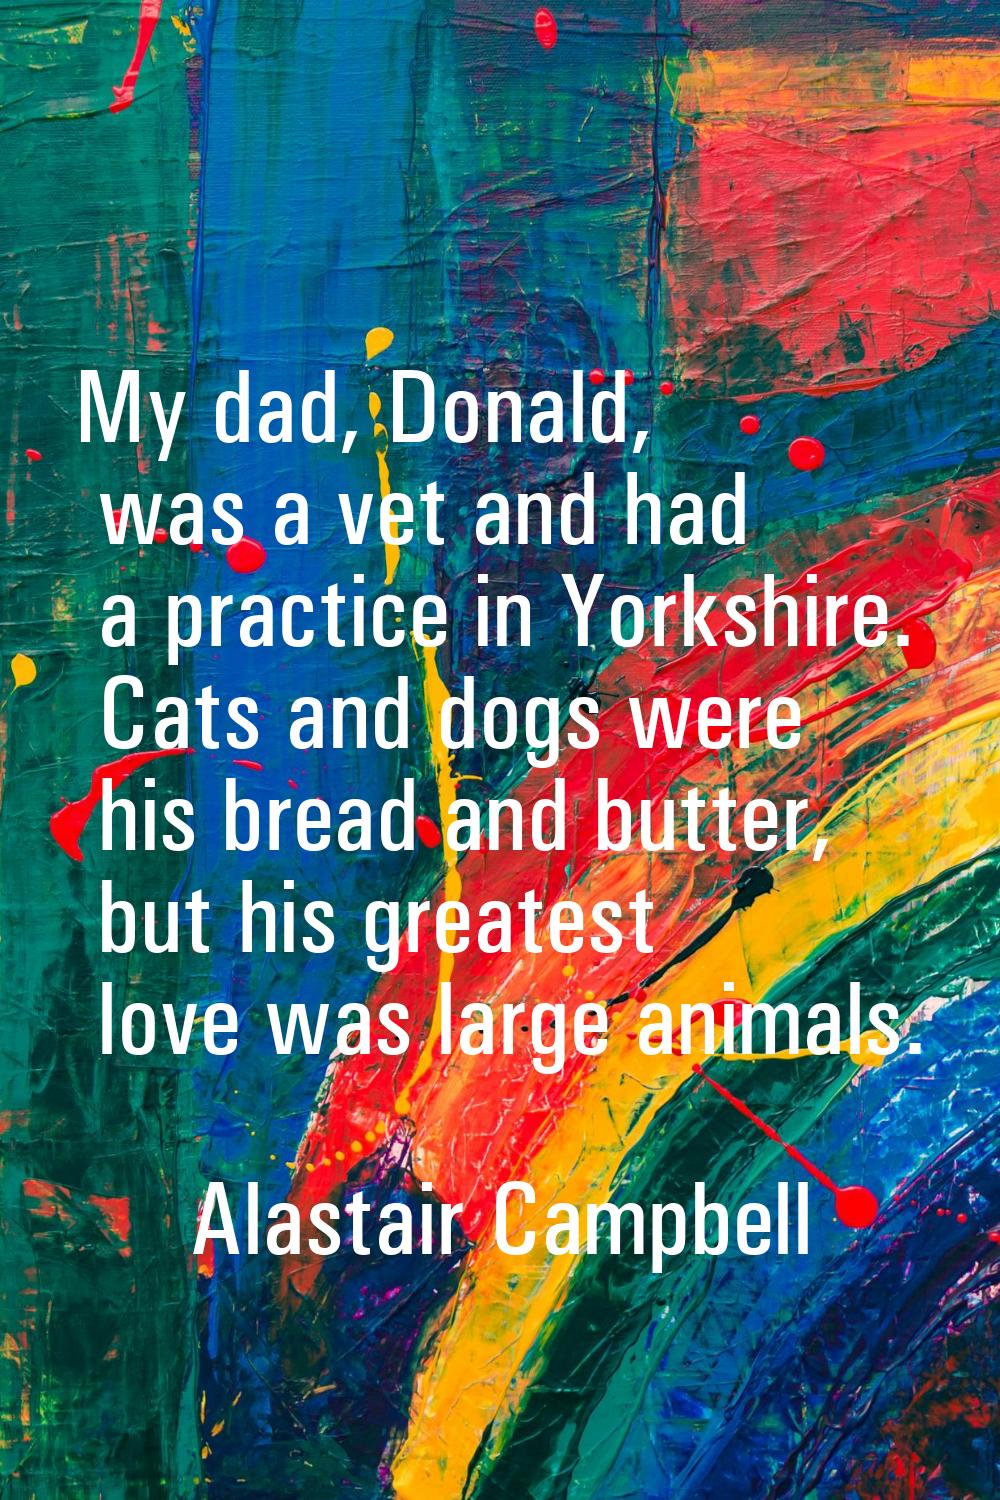 My dad, Donald, was a vet and had a practice in Yorkshire. Cats and dogs were his bread and butter,